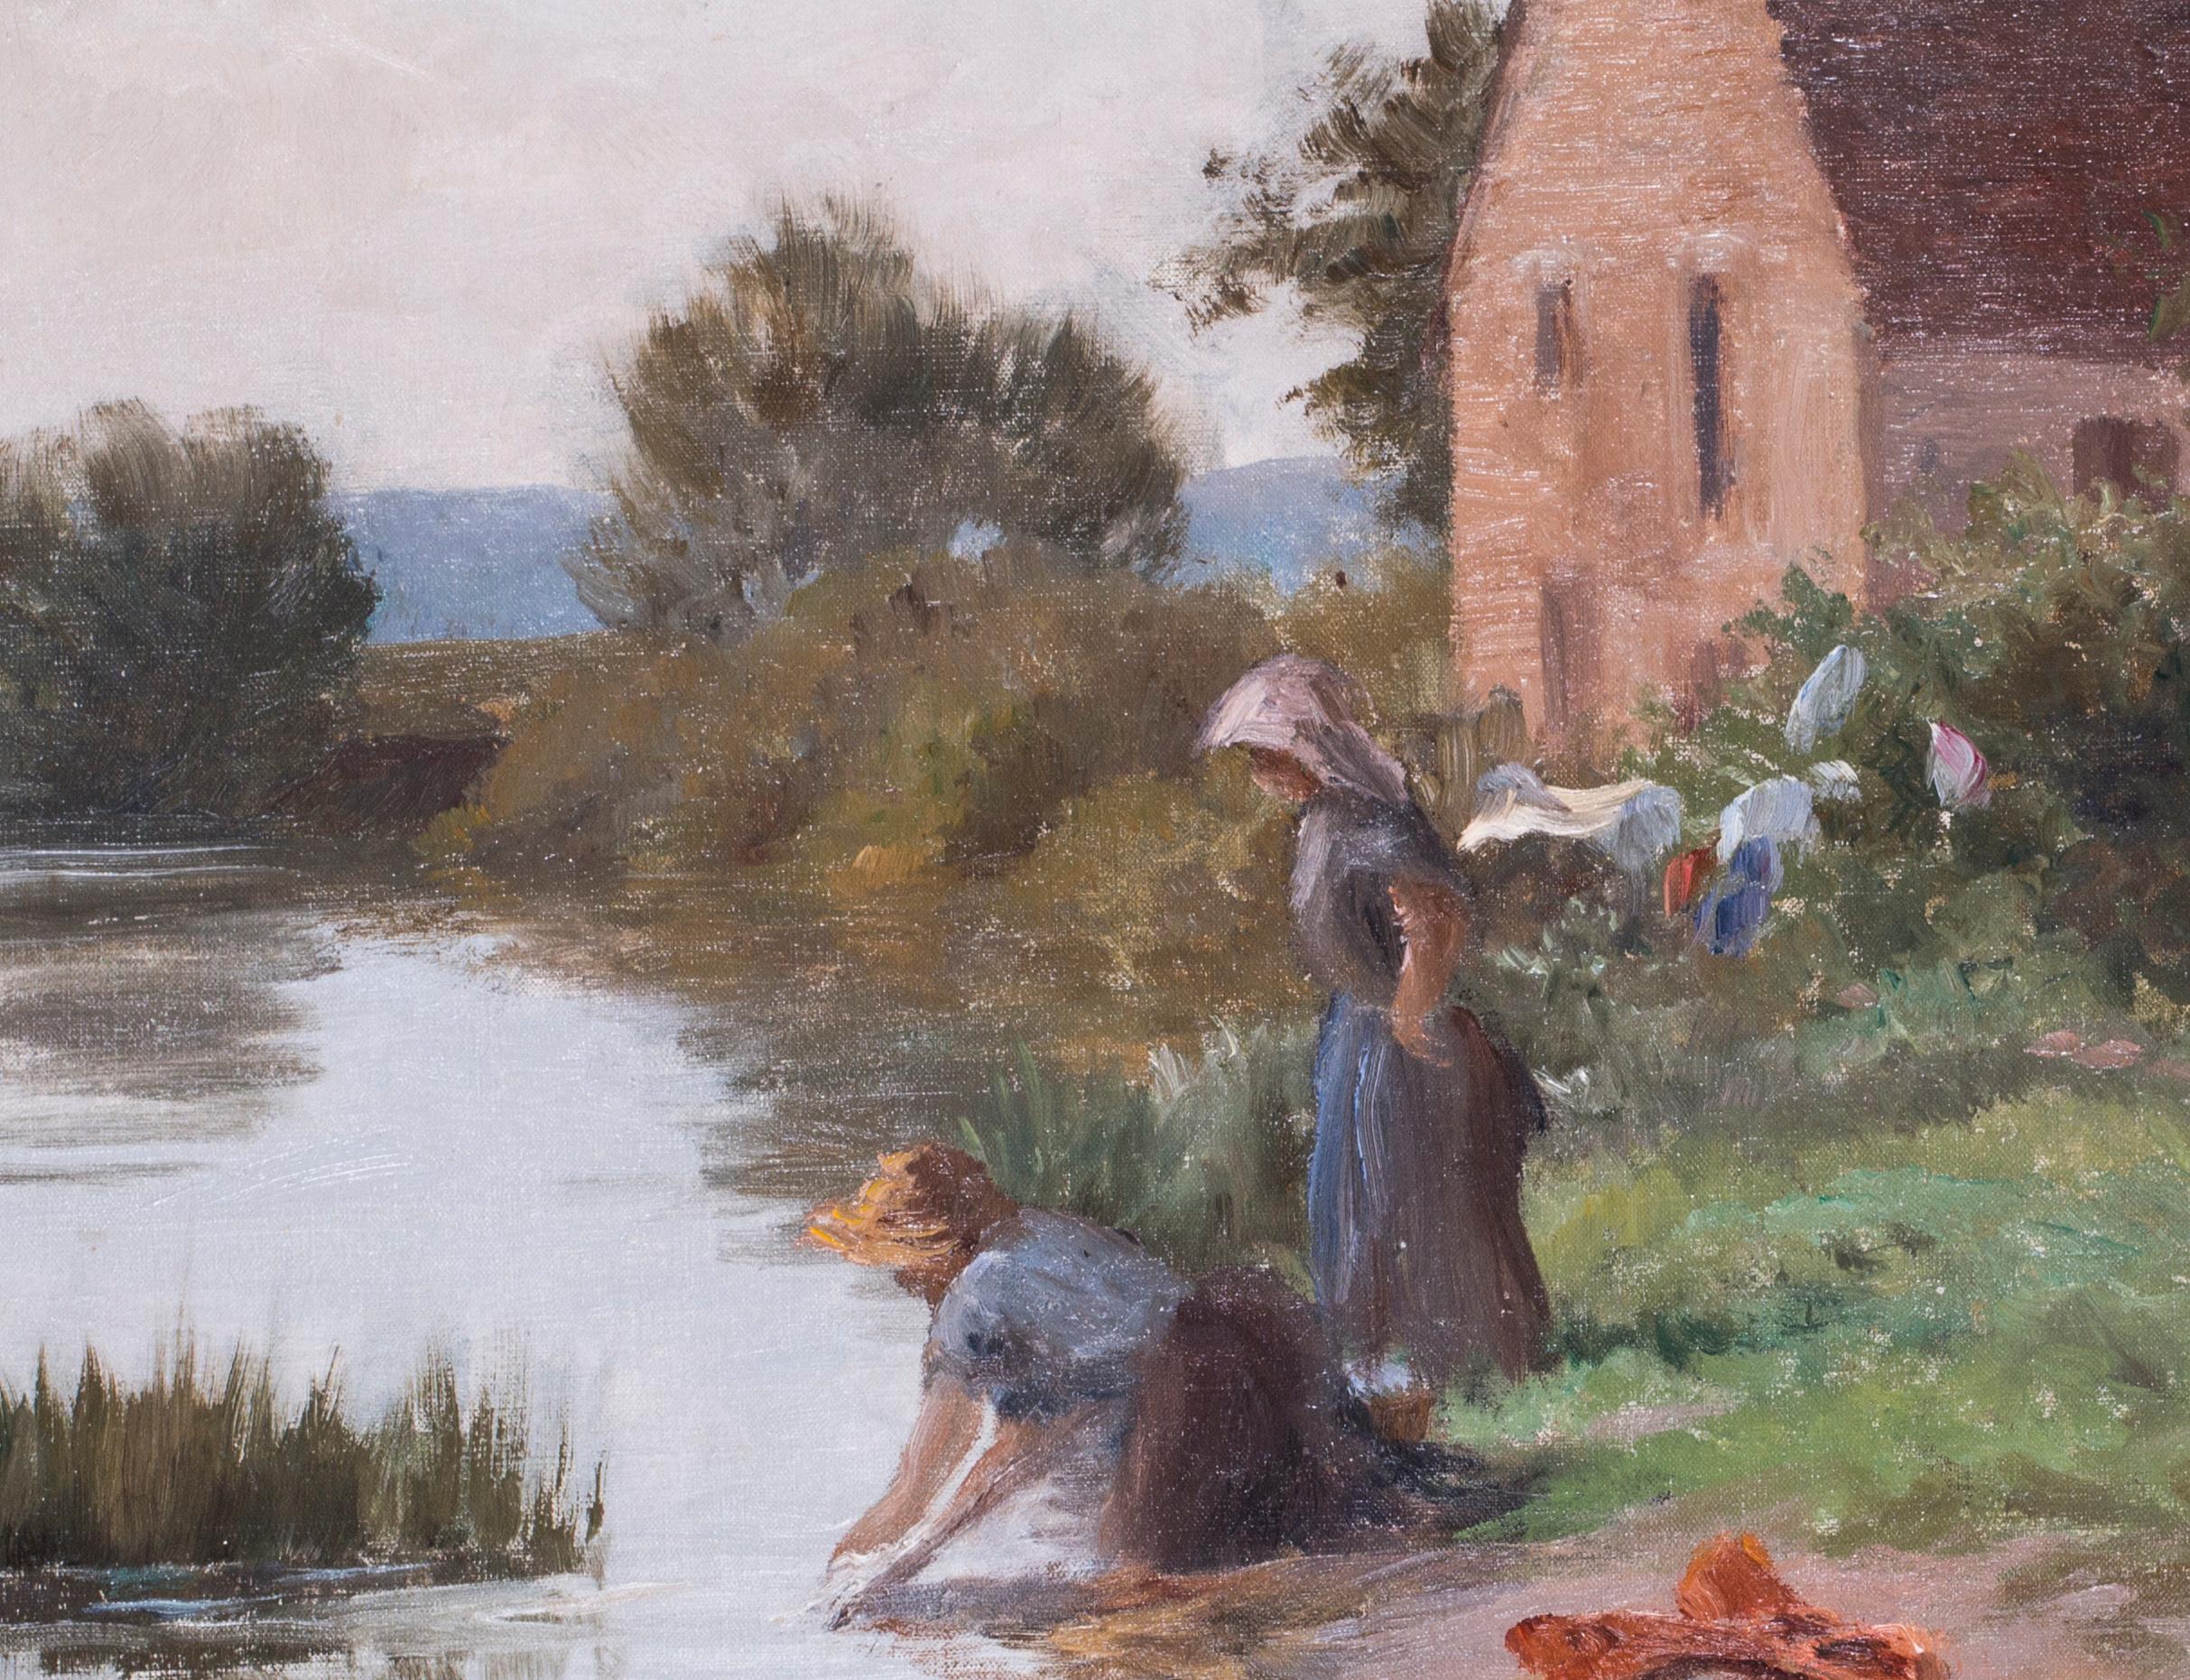 Georges-Marie-Julien Girardot (French, 1856-1914)
 Les Lavandieres (The Washerwomen)
Oil on canvas
24.3/8 X 48.3/8in. (including frame)
Provenance : Girardot Family Collection

Georges Girardot was trained by the artist Albert Maignan in Paris. He